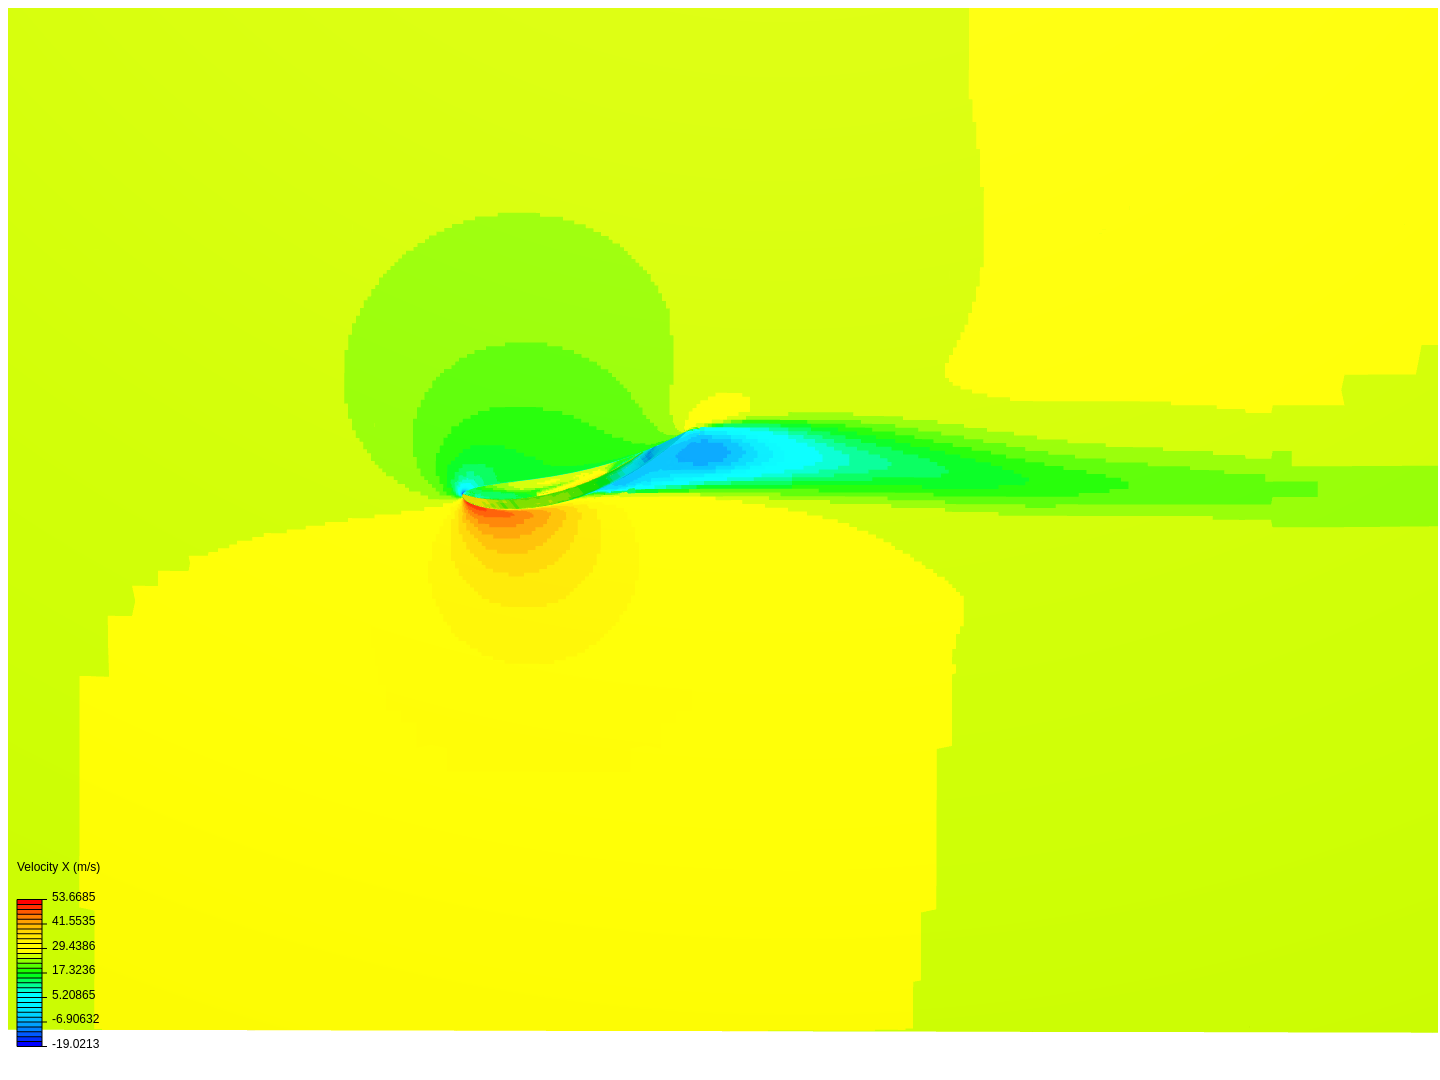 16 Degree Angle Of attack Airfoil CFD image